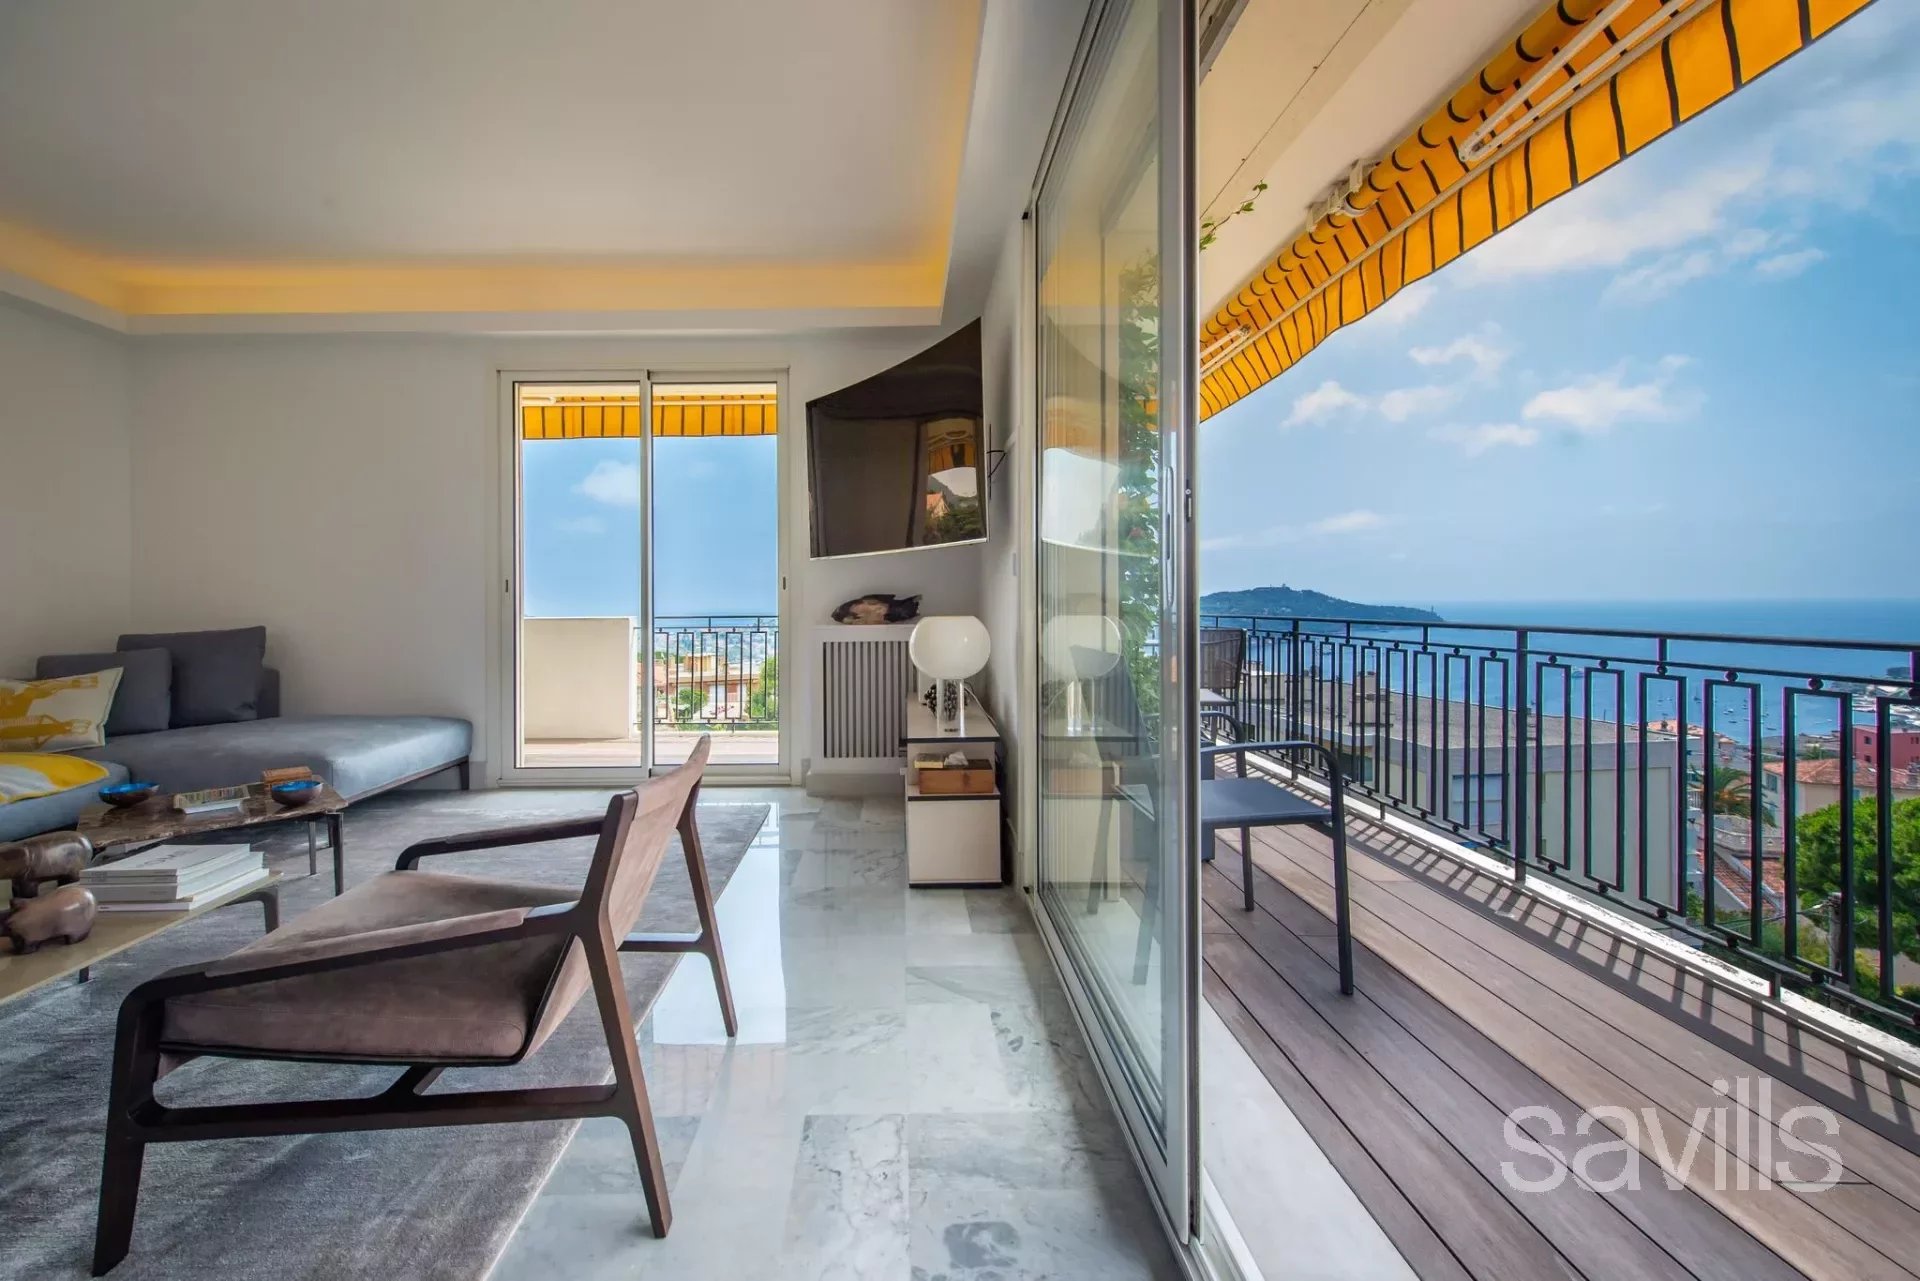 2 bedroom apartment with sea view 25 sqm terrace